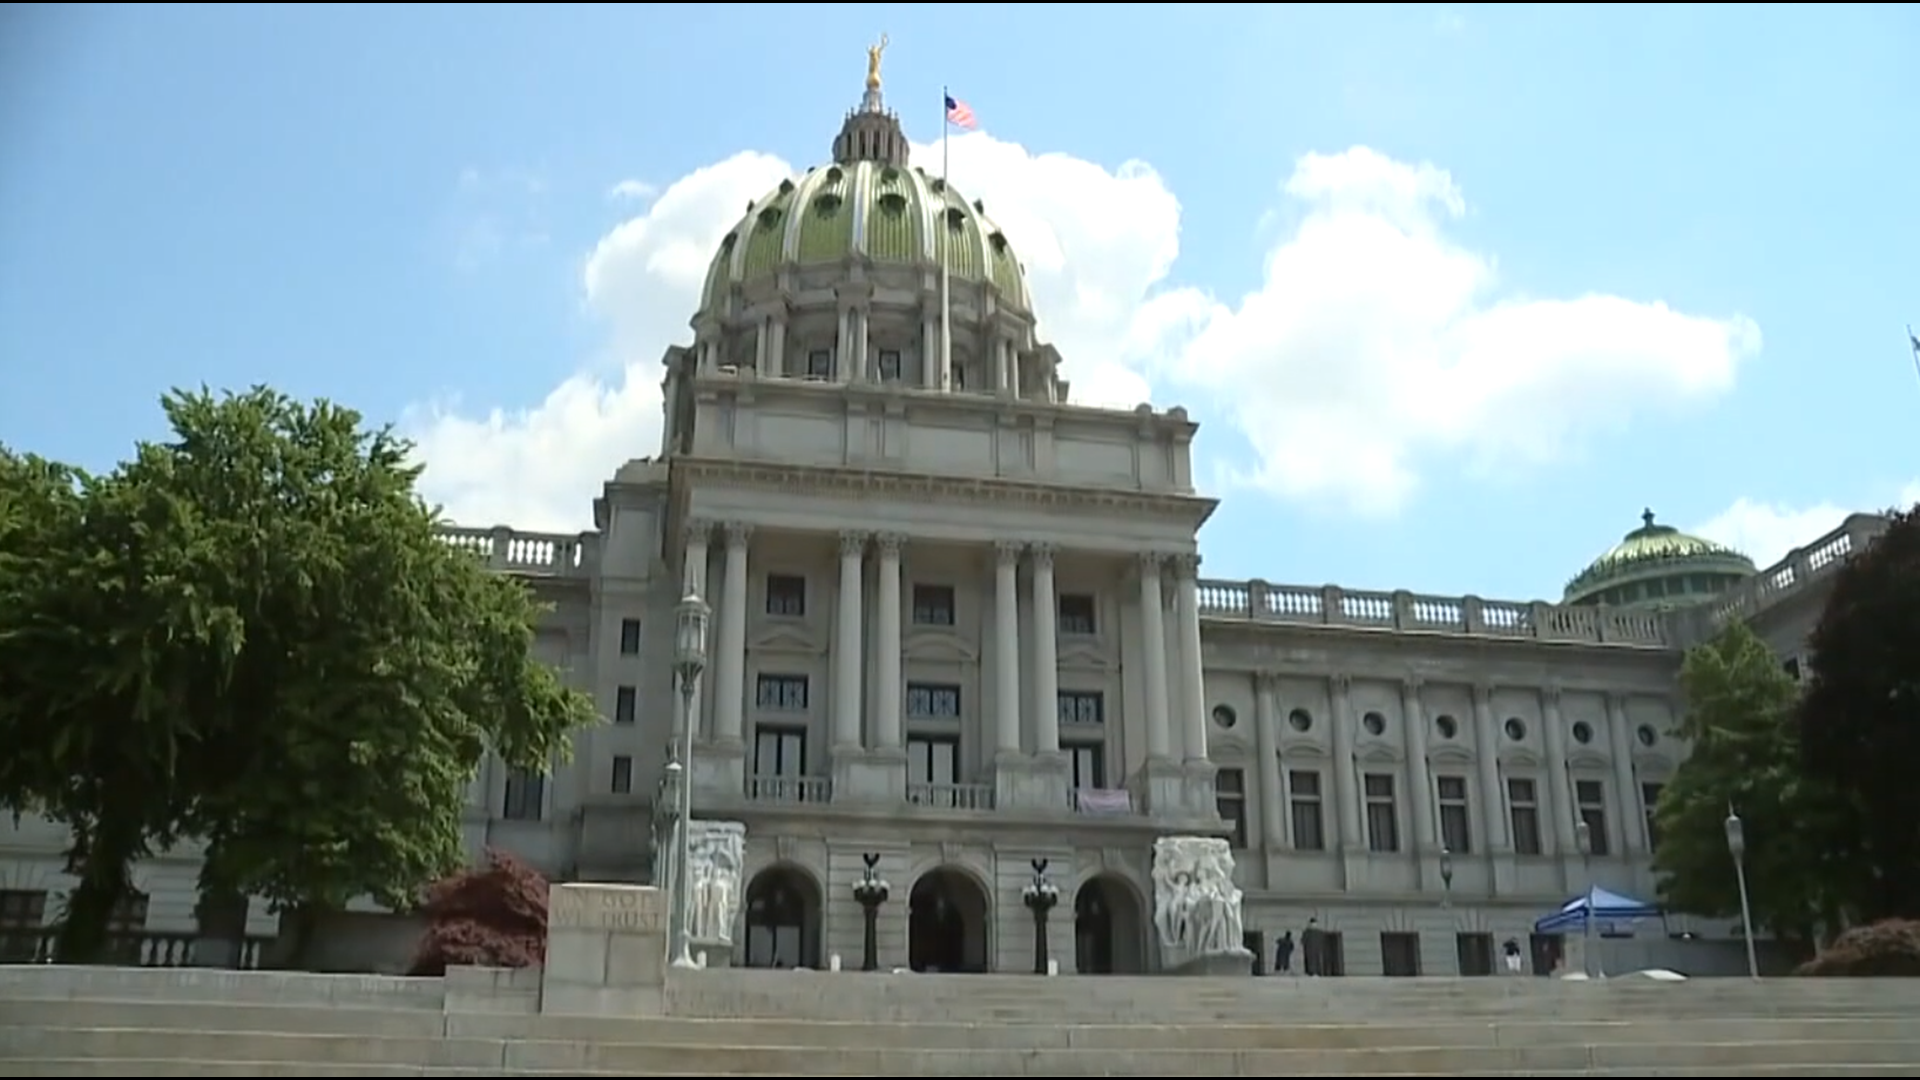 The Senate voted 30-20 to end Gov. Wolf's COVID-19 emergency disaster declaration after approving an amended House Bill that keeps in place some of the waivers.